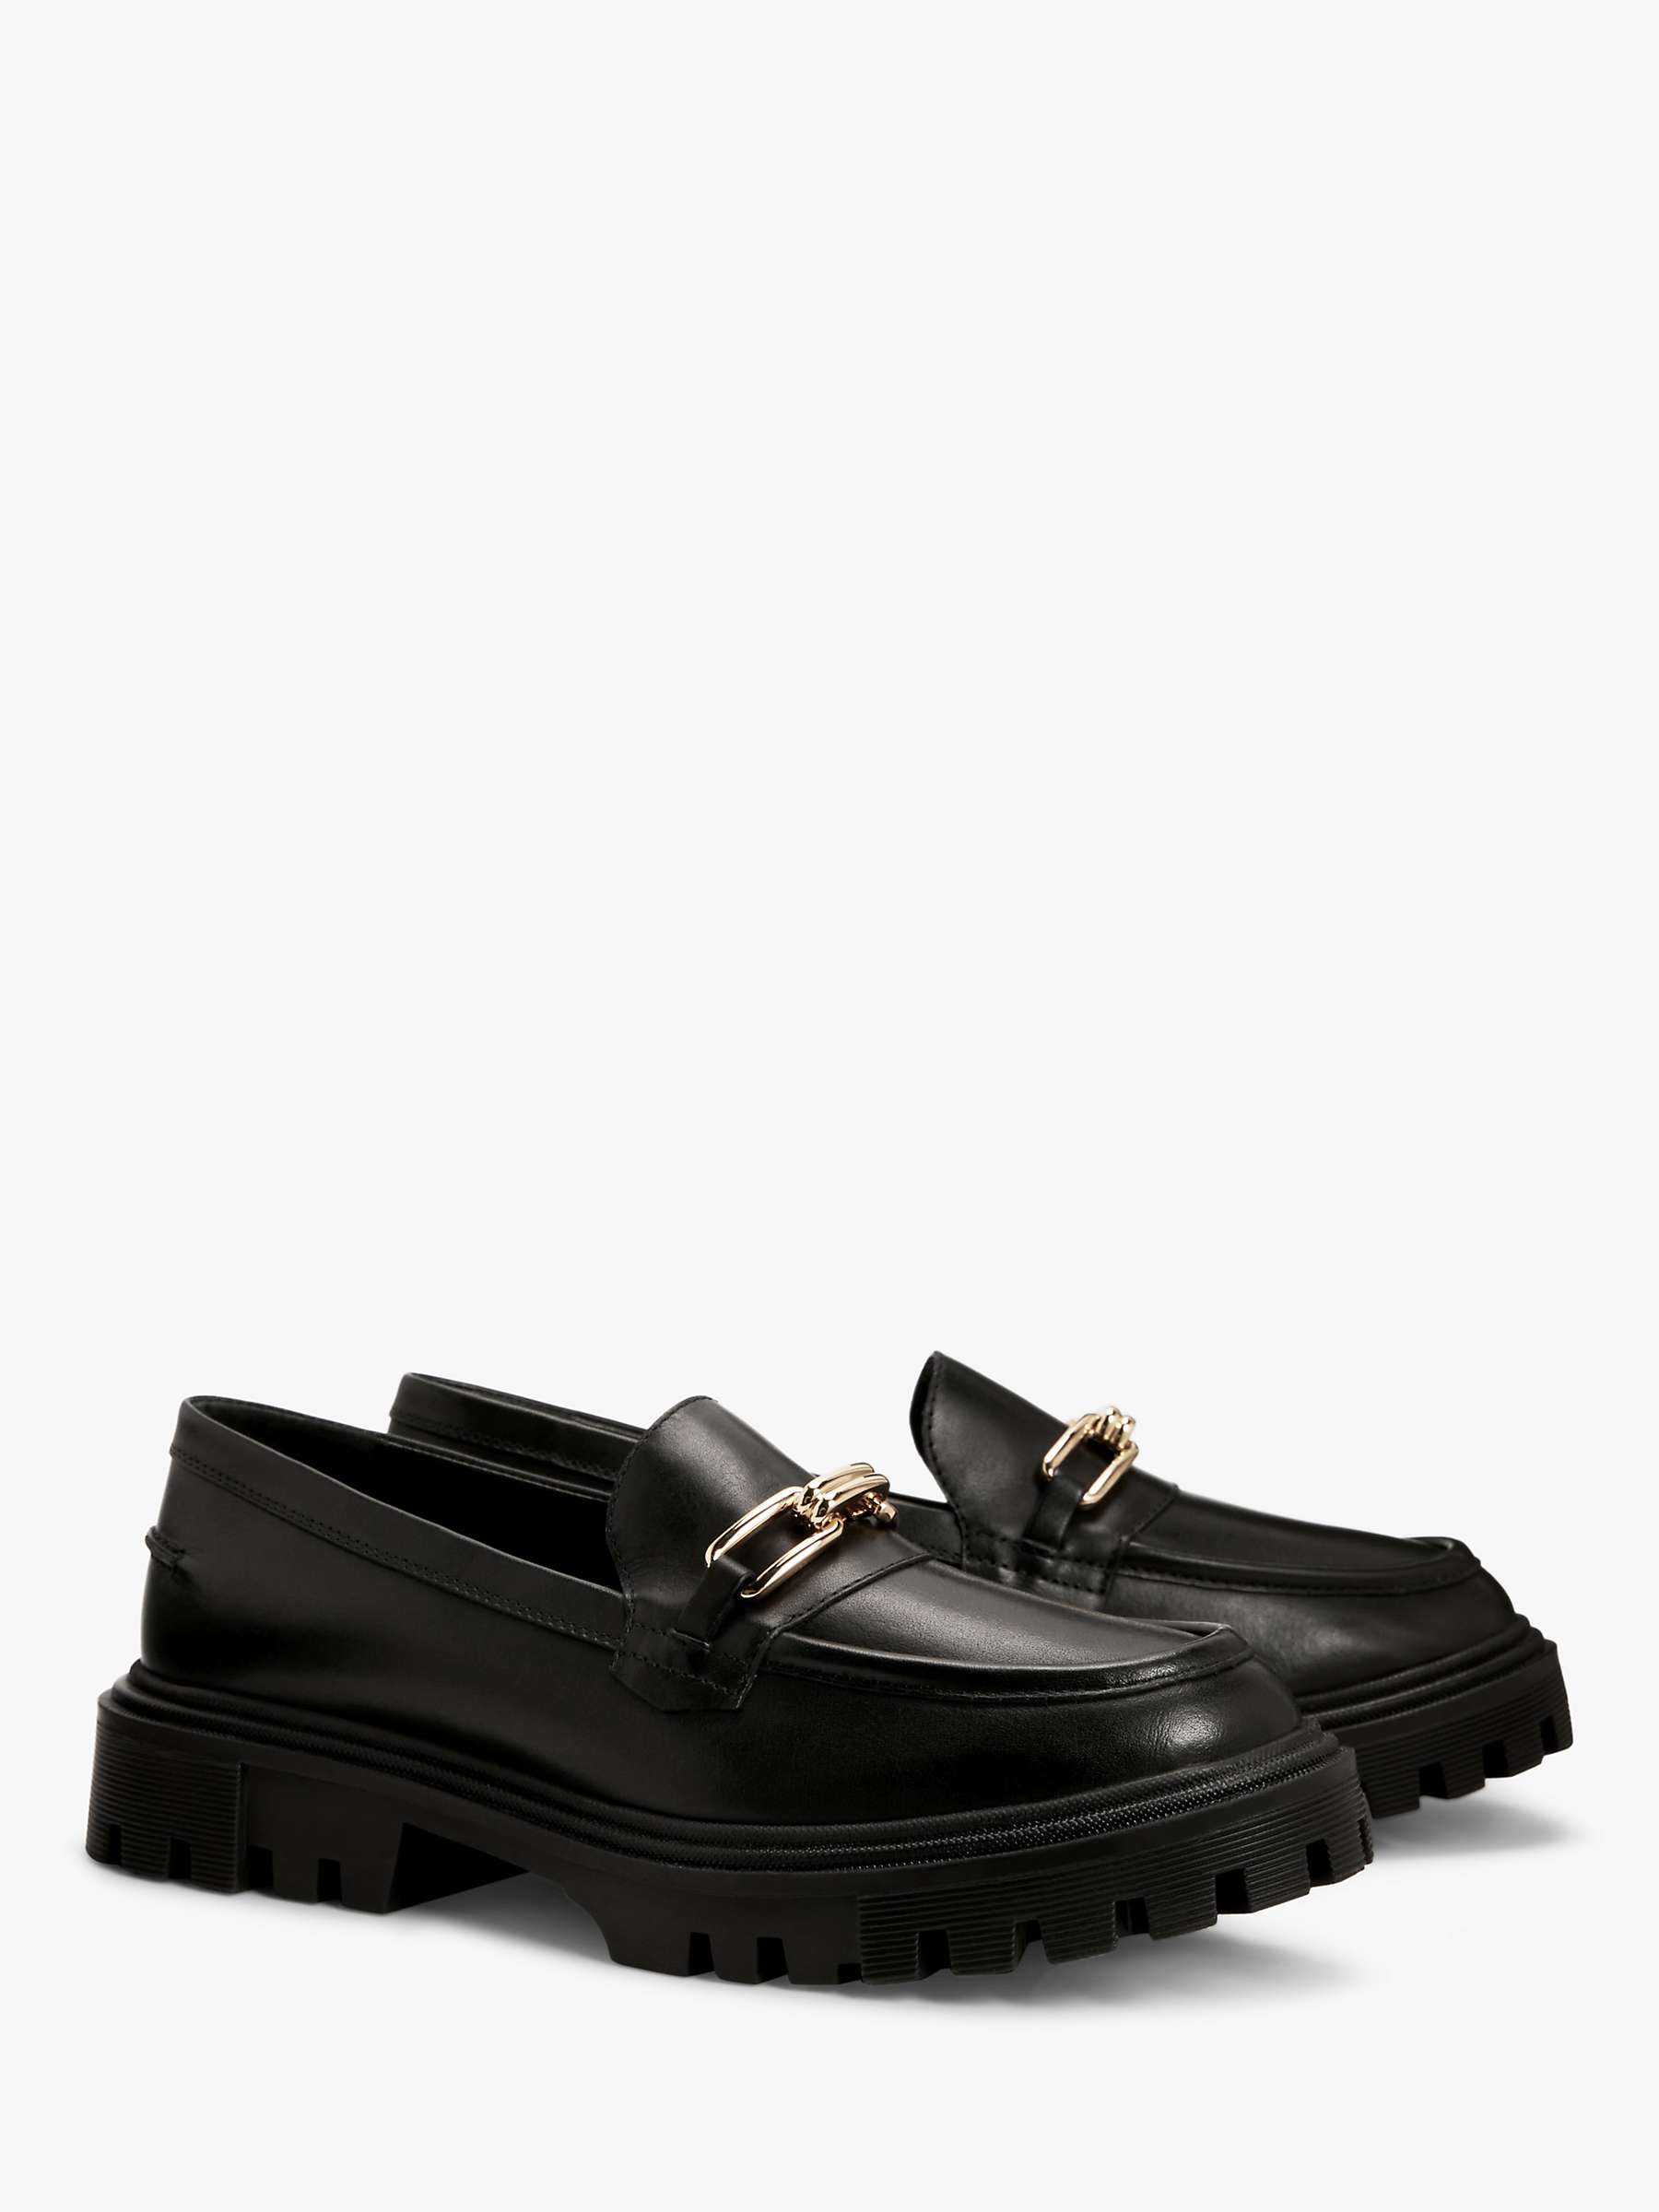 Buy John Lewis Glowing Leather Chunky Platform Loafers Online at johnlewis.com